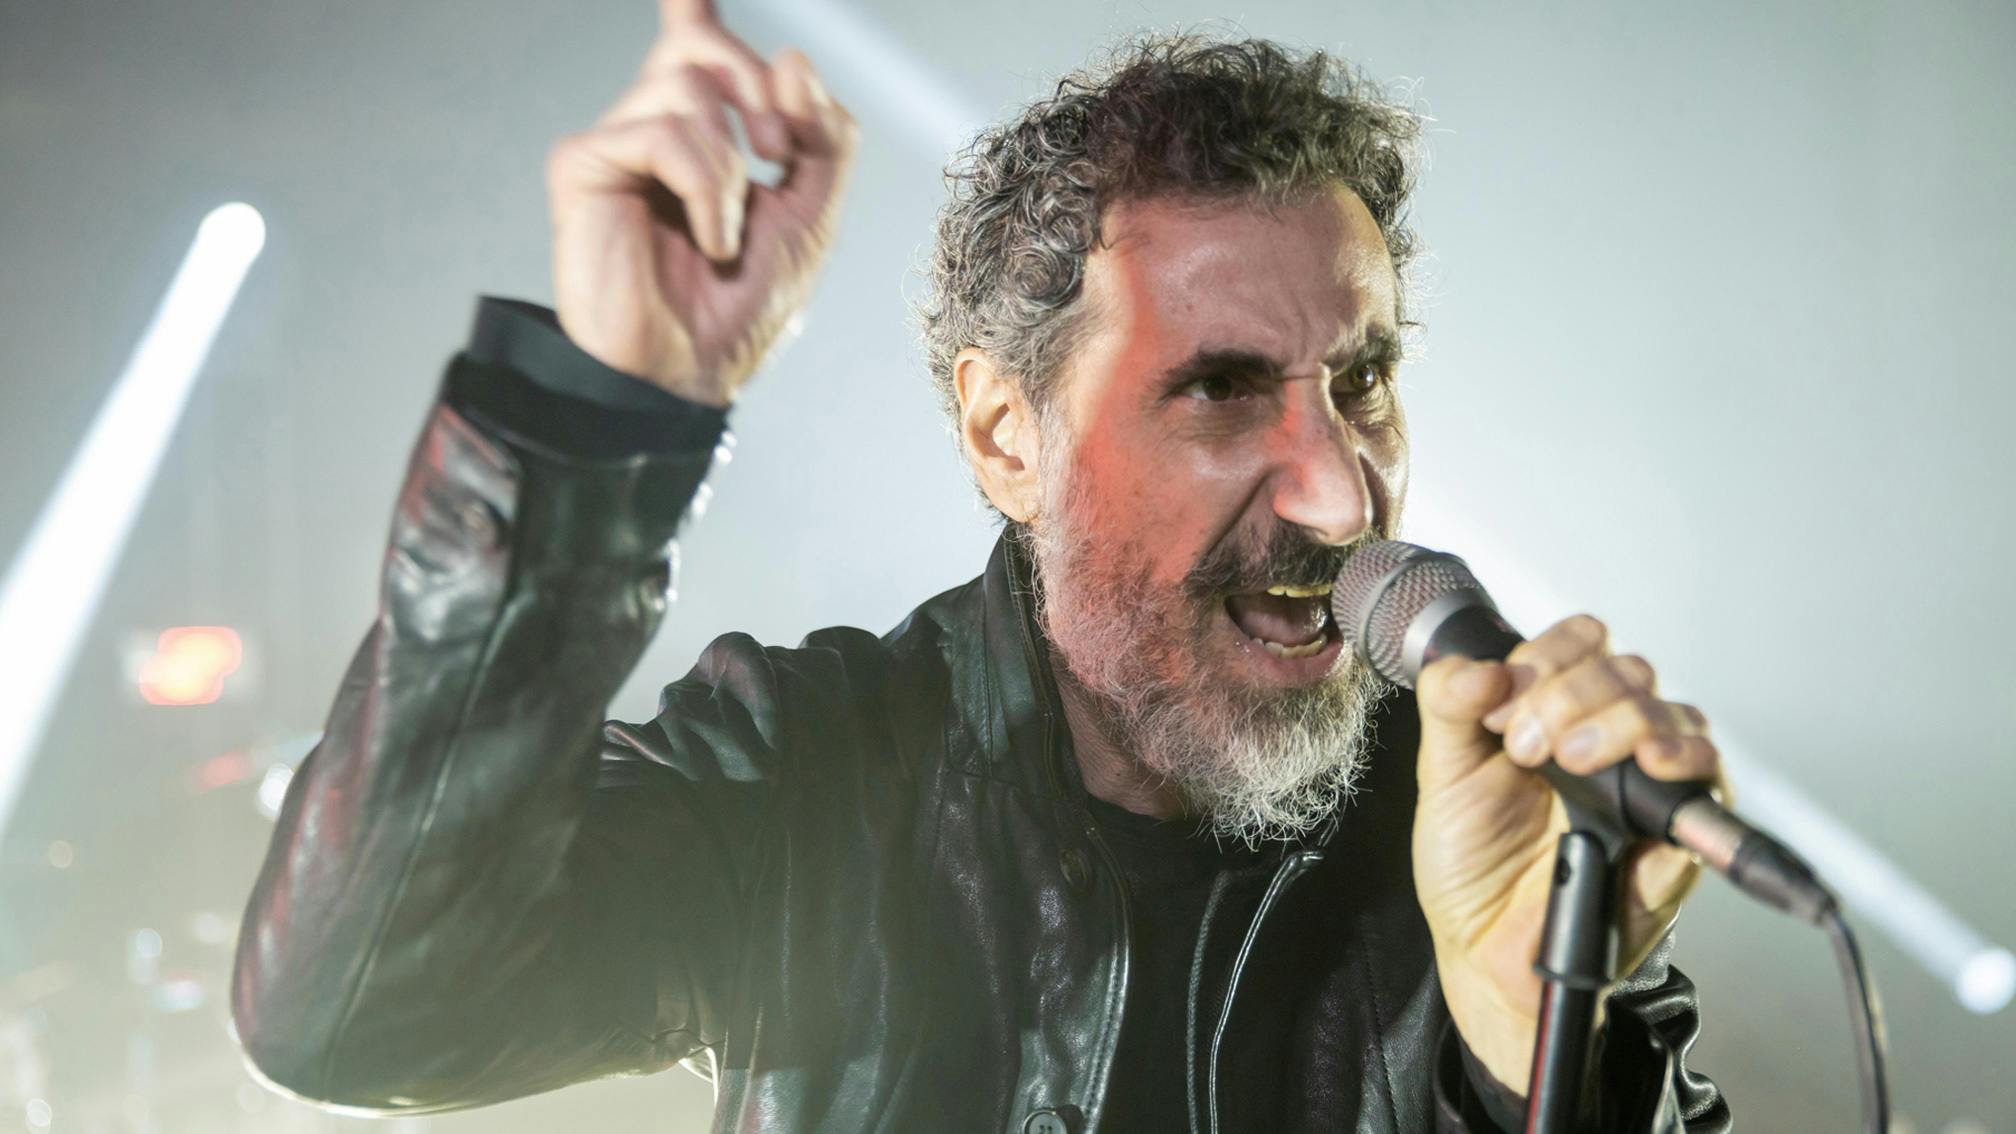 Serj Tankian has got another rock EP, film scores and more in the works